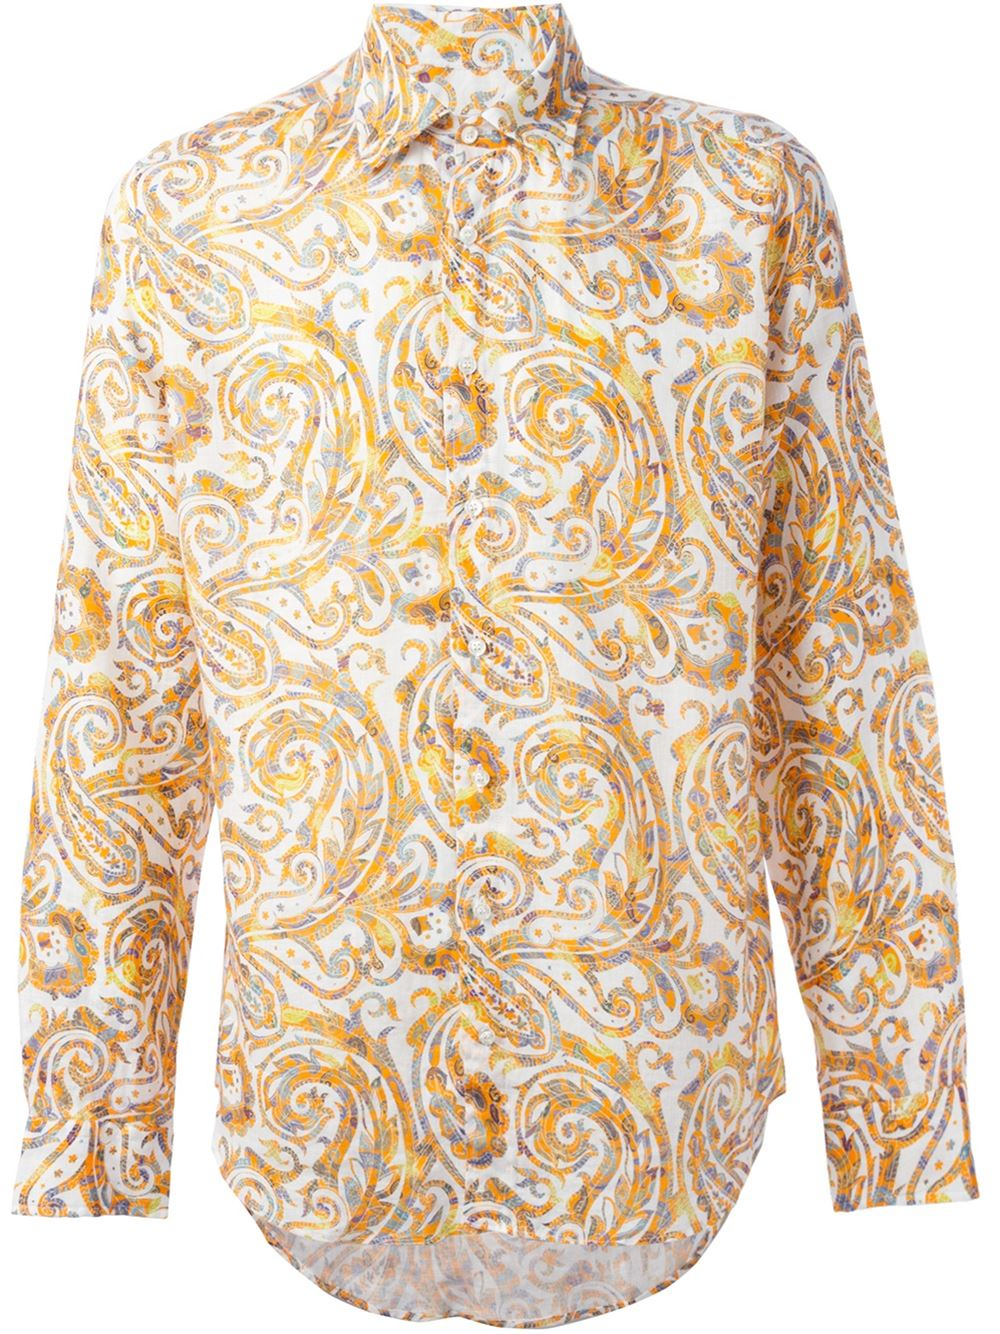 Lyst - Etro Floral Paisley Shirt in Yellow for Men